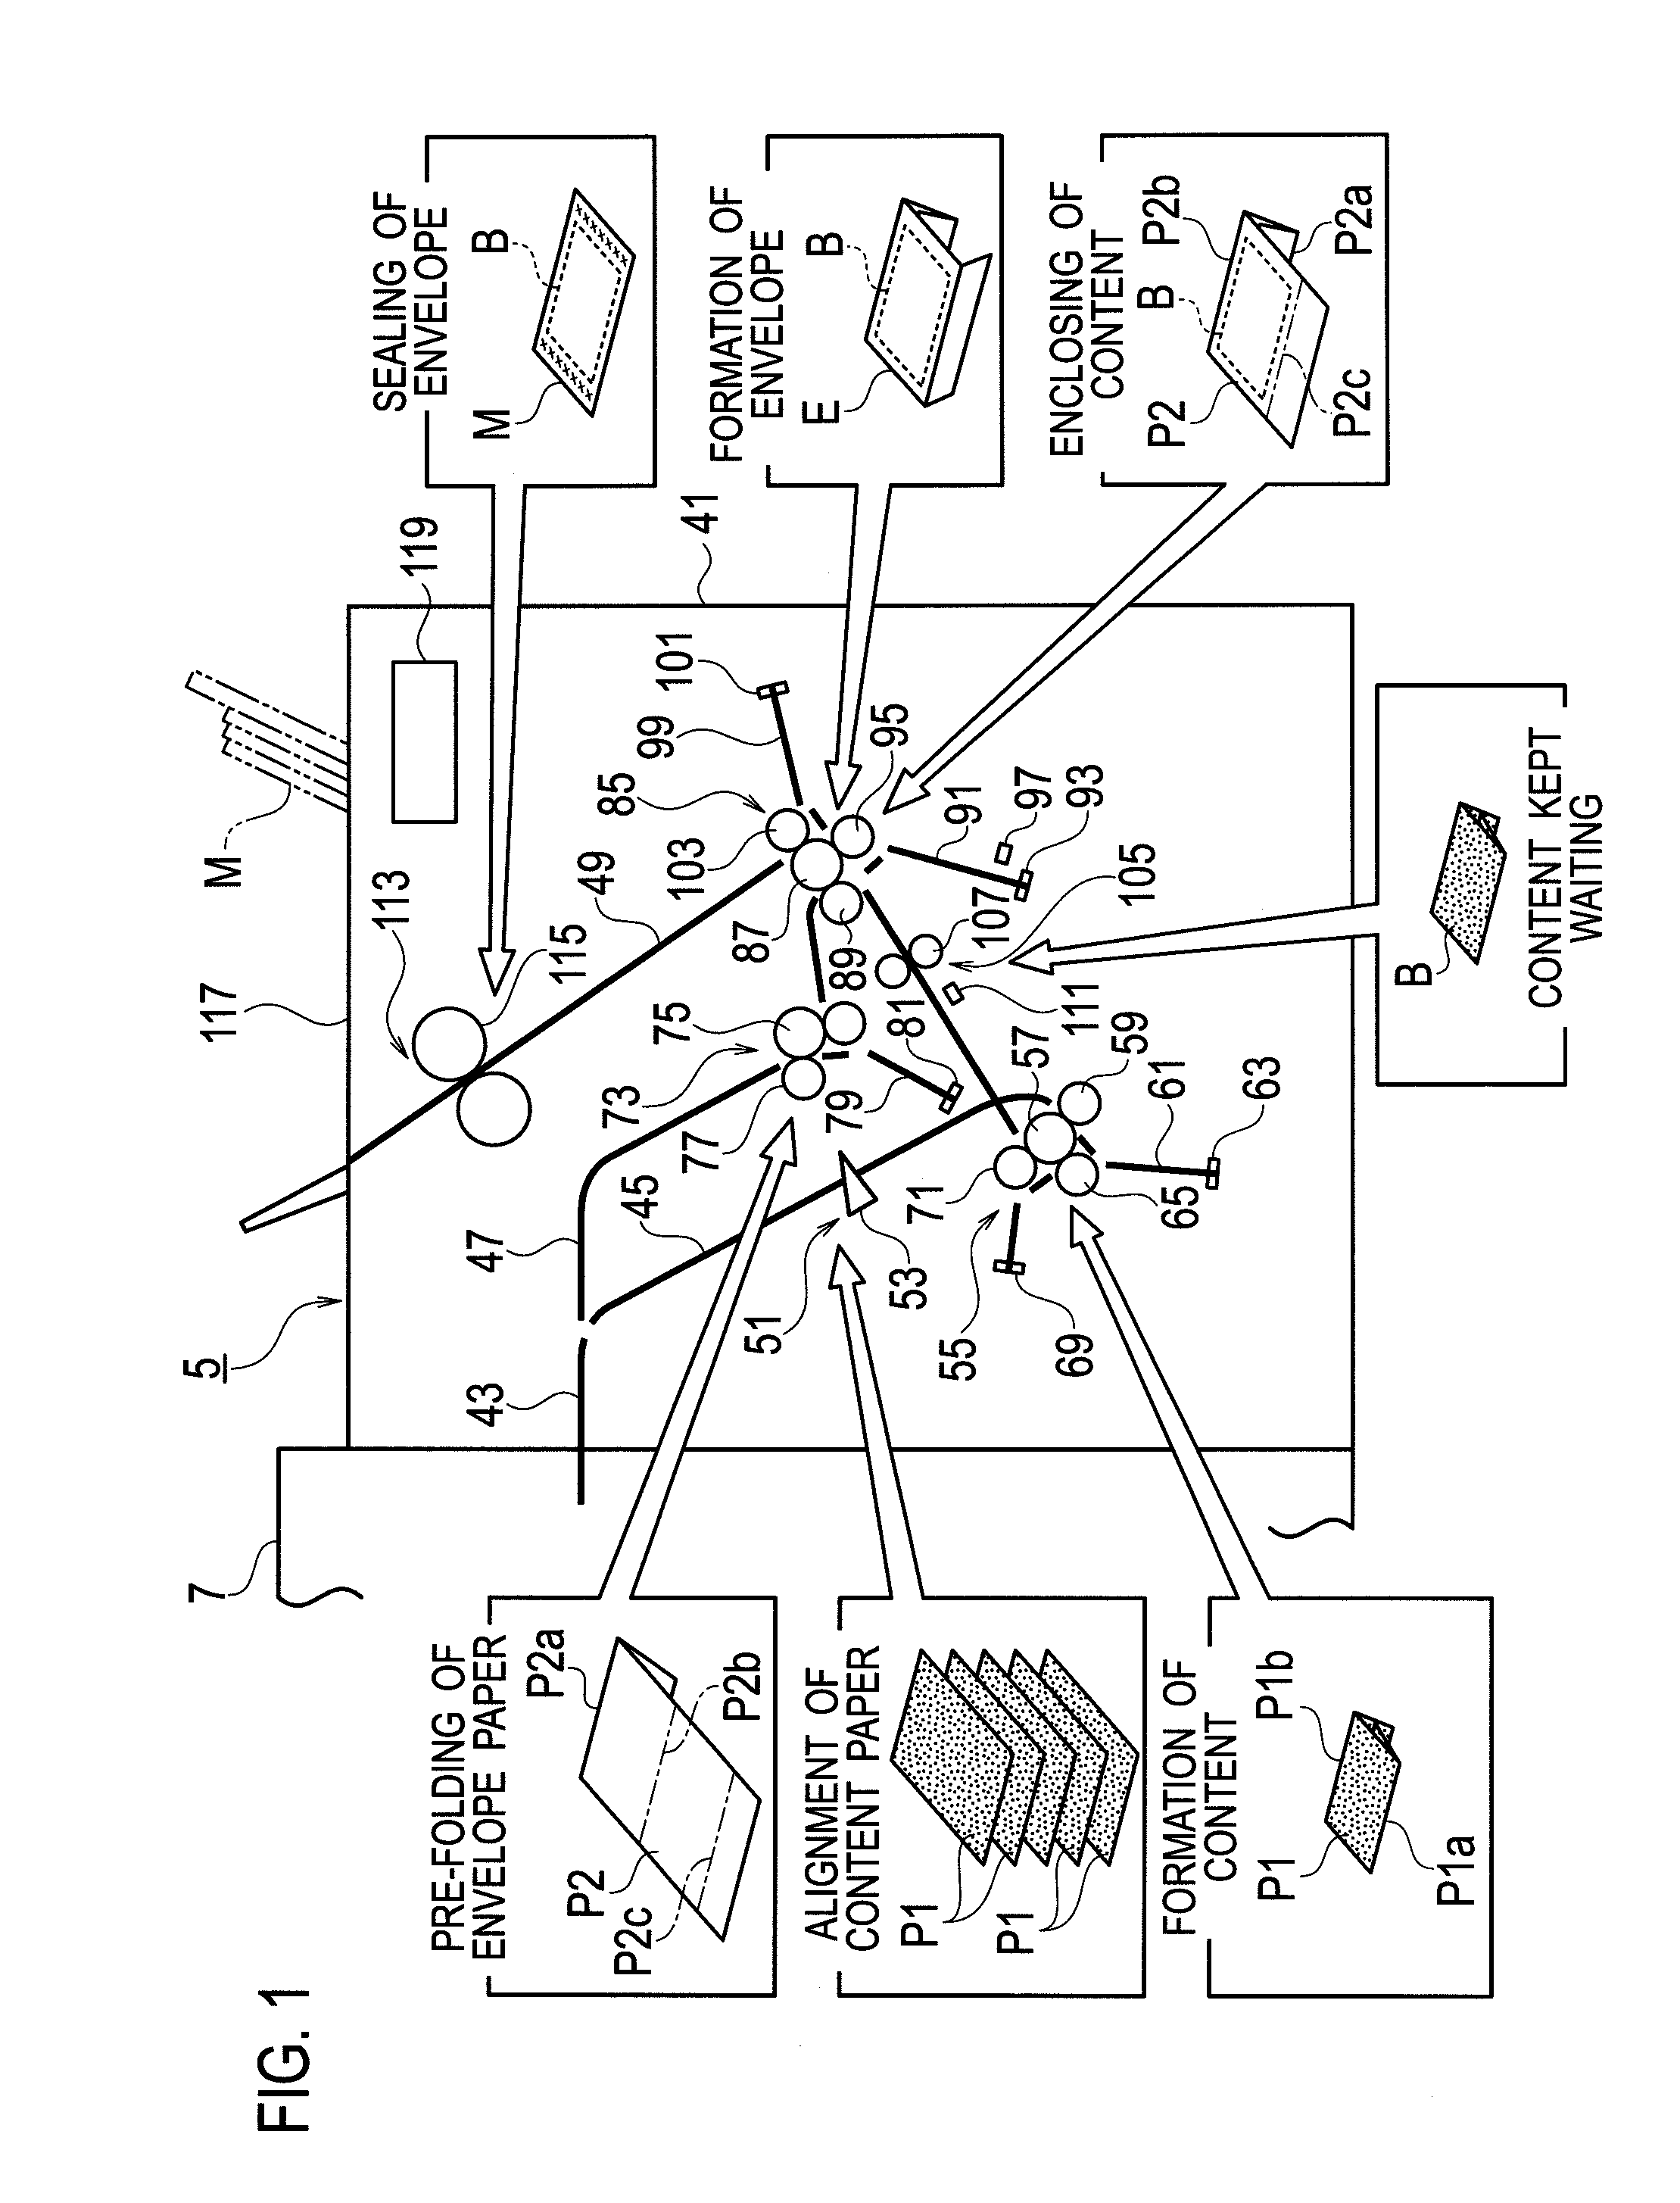 Enclosing-sealing device and image formation system having the same